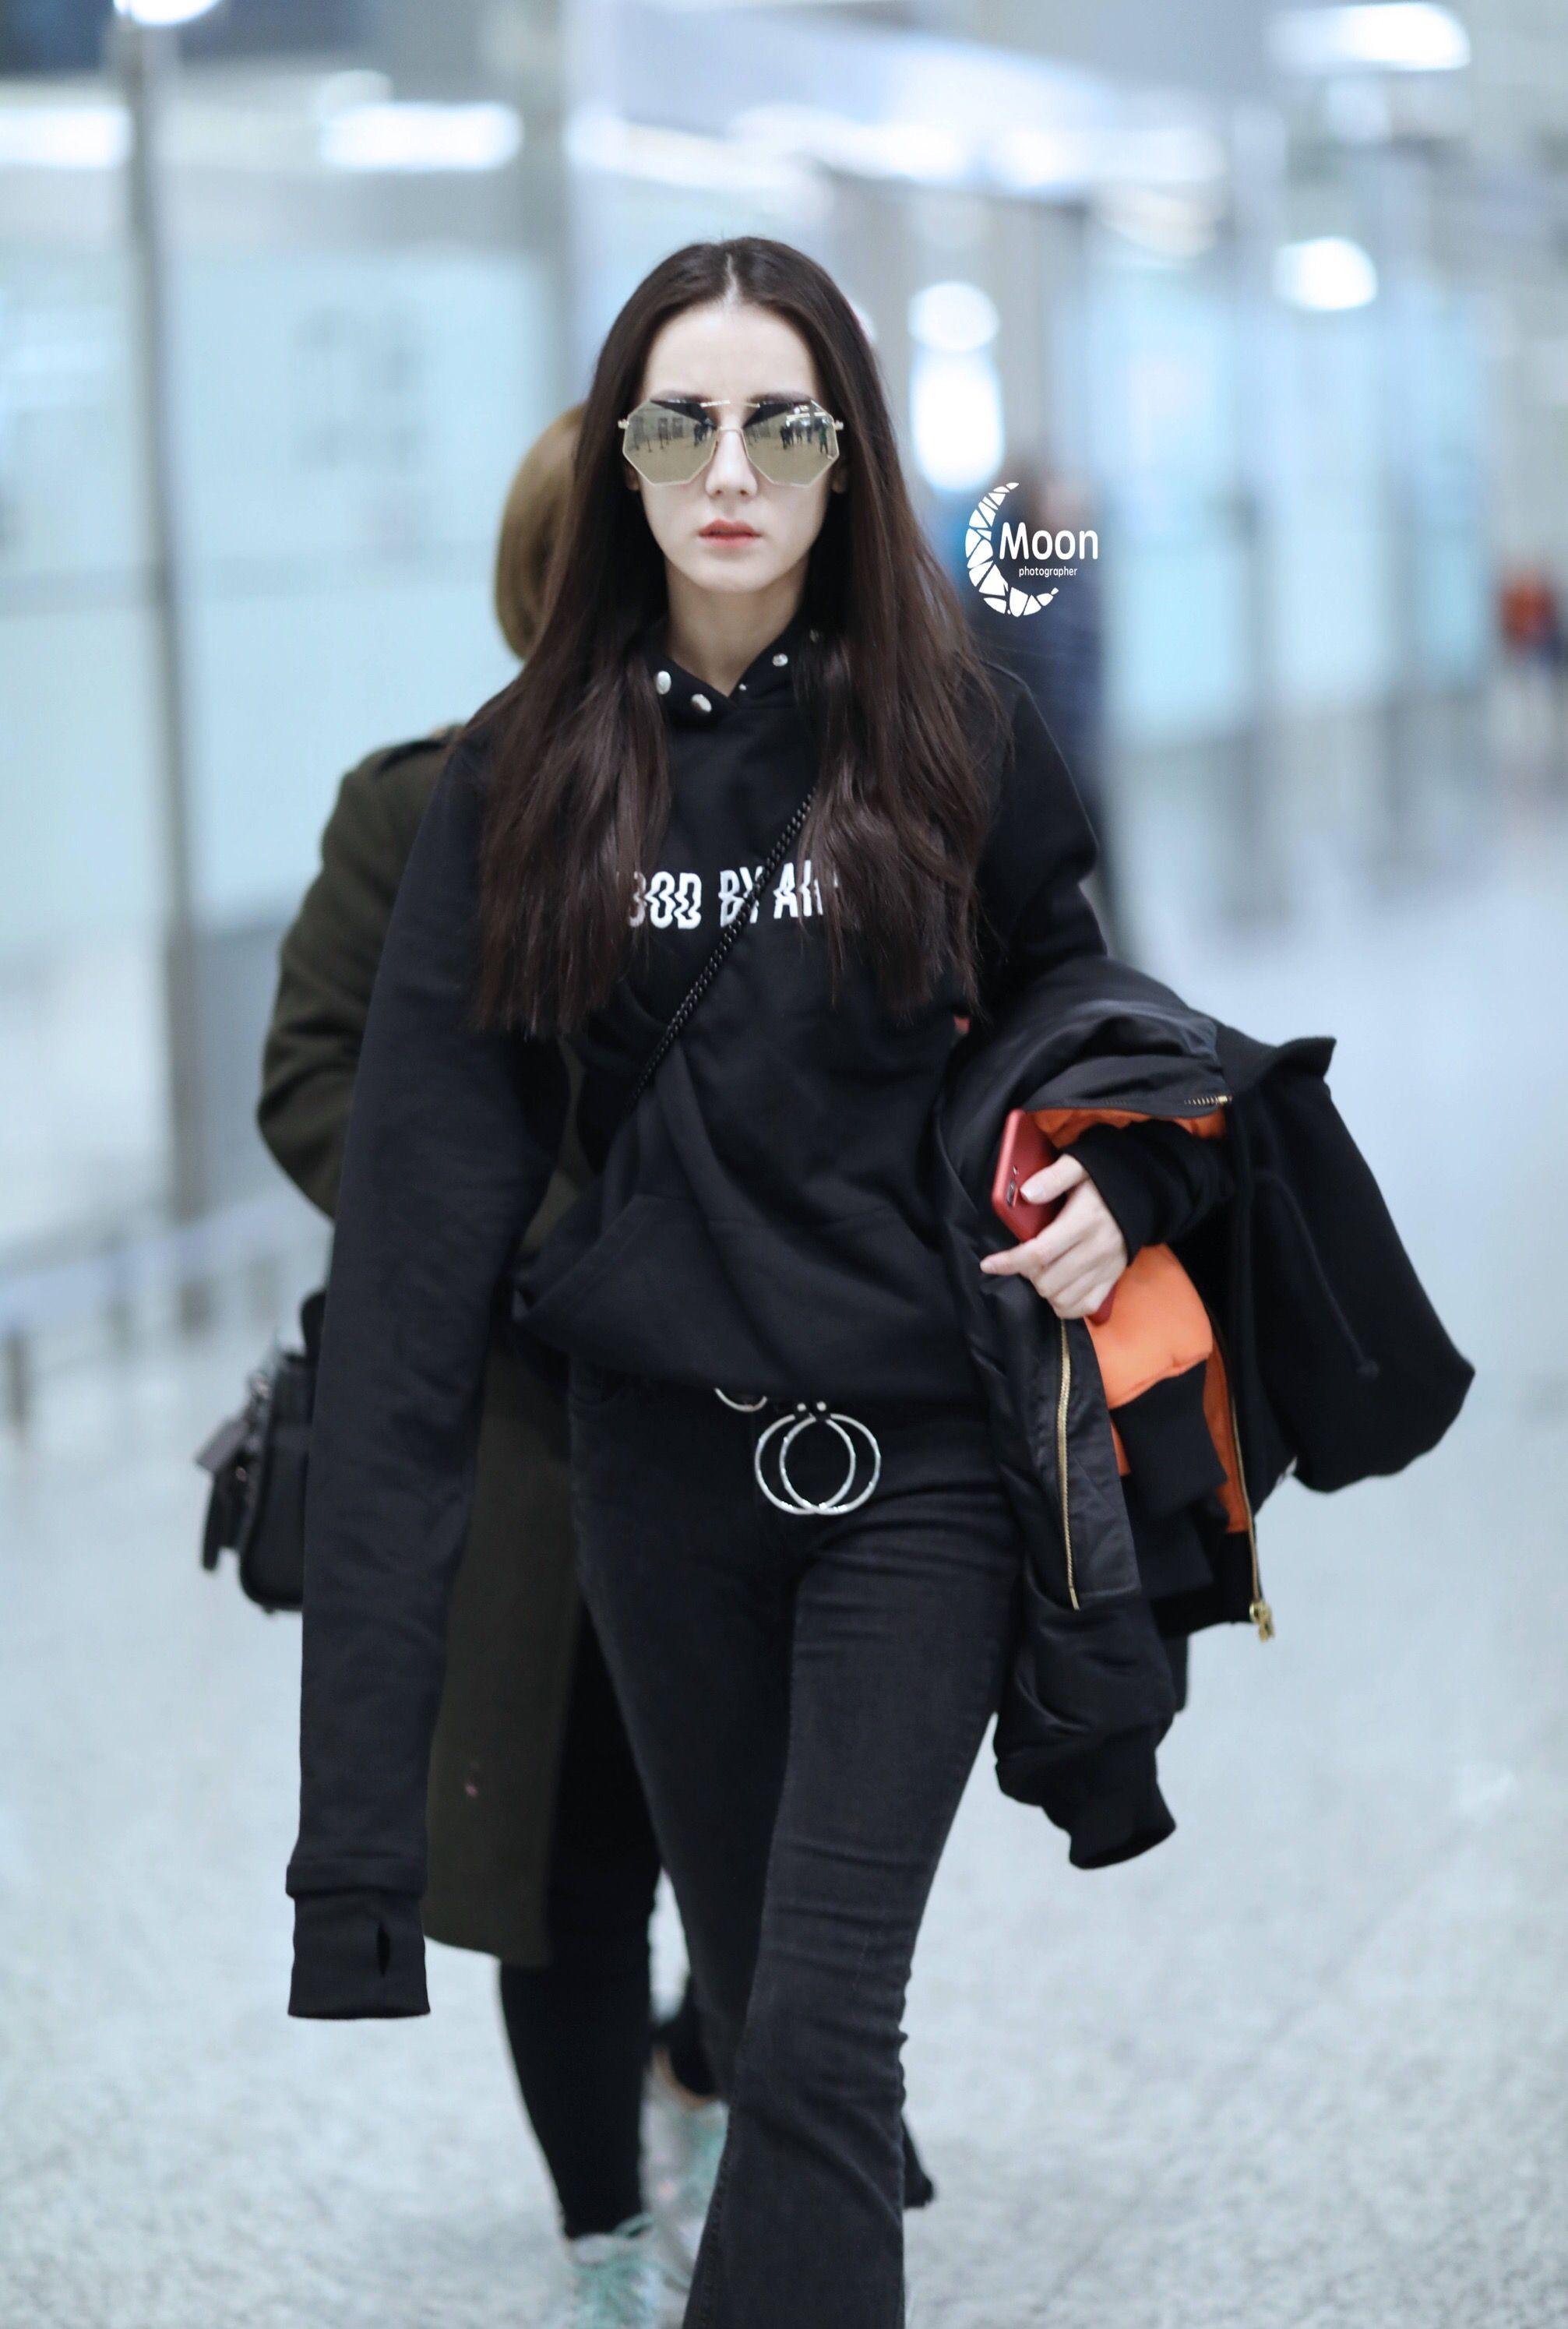 Feature Celebrity Airport Fashion (Ladies Edition)